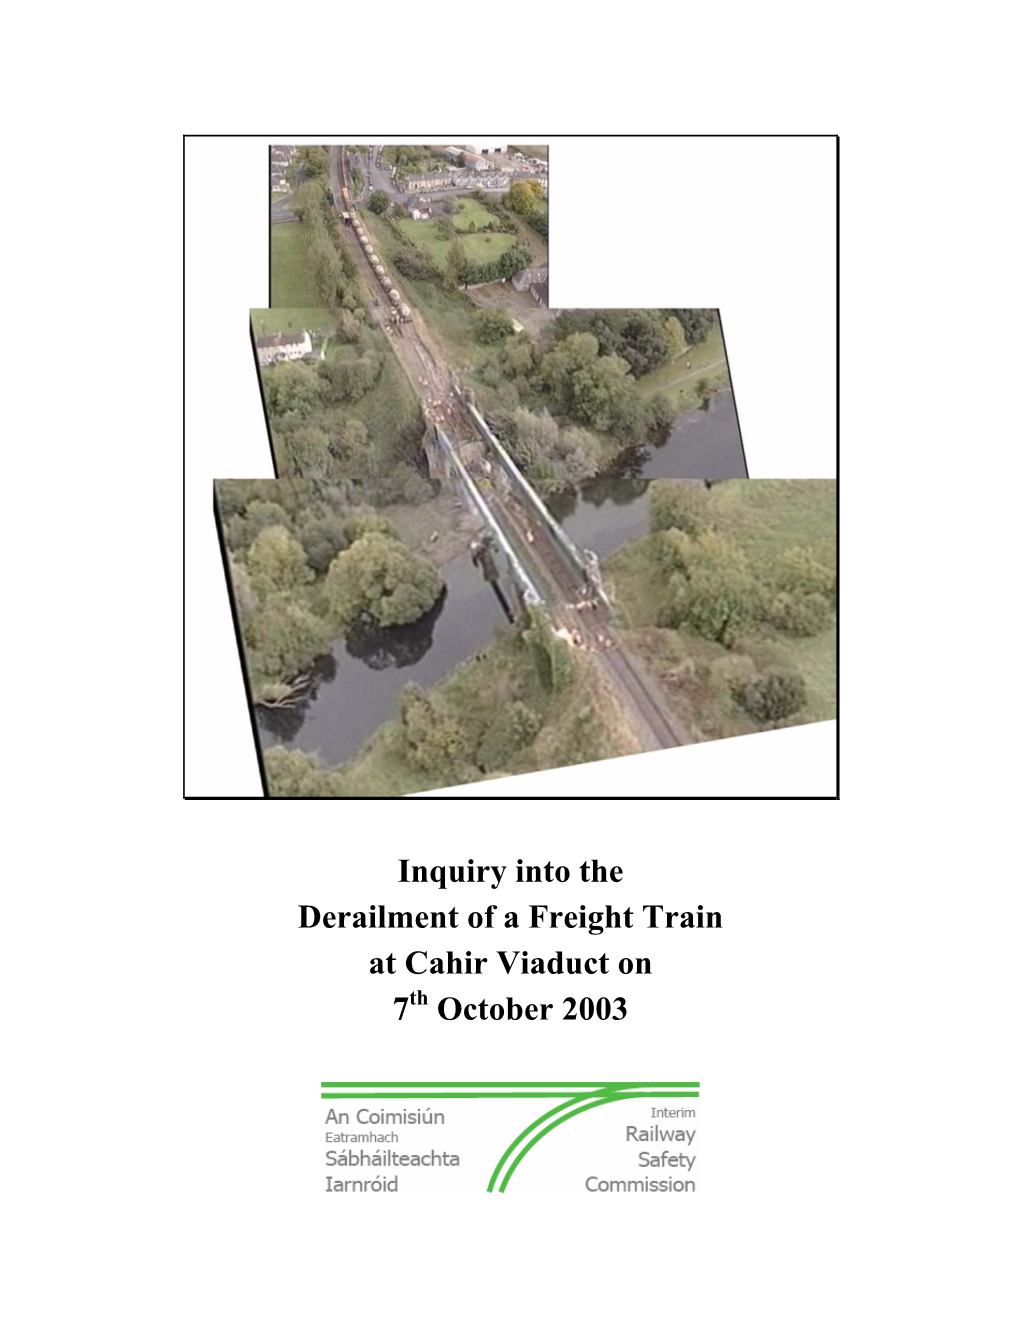 Inquiry Into the Derailment of a Freight Train at Cahir Viaduct on 7Th October 2003